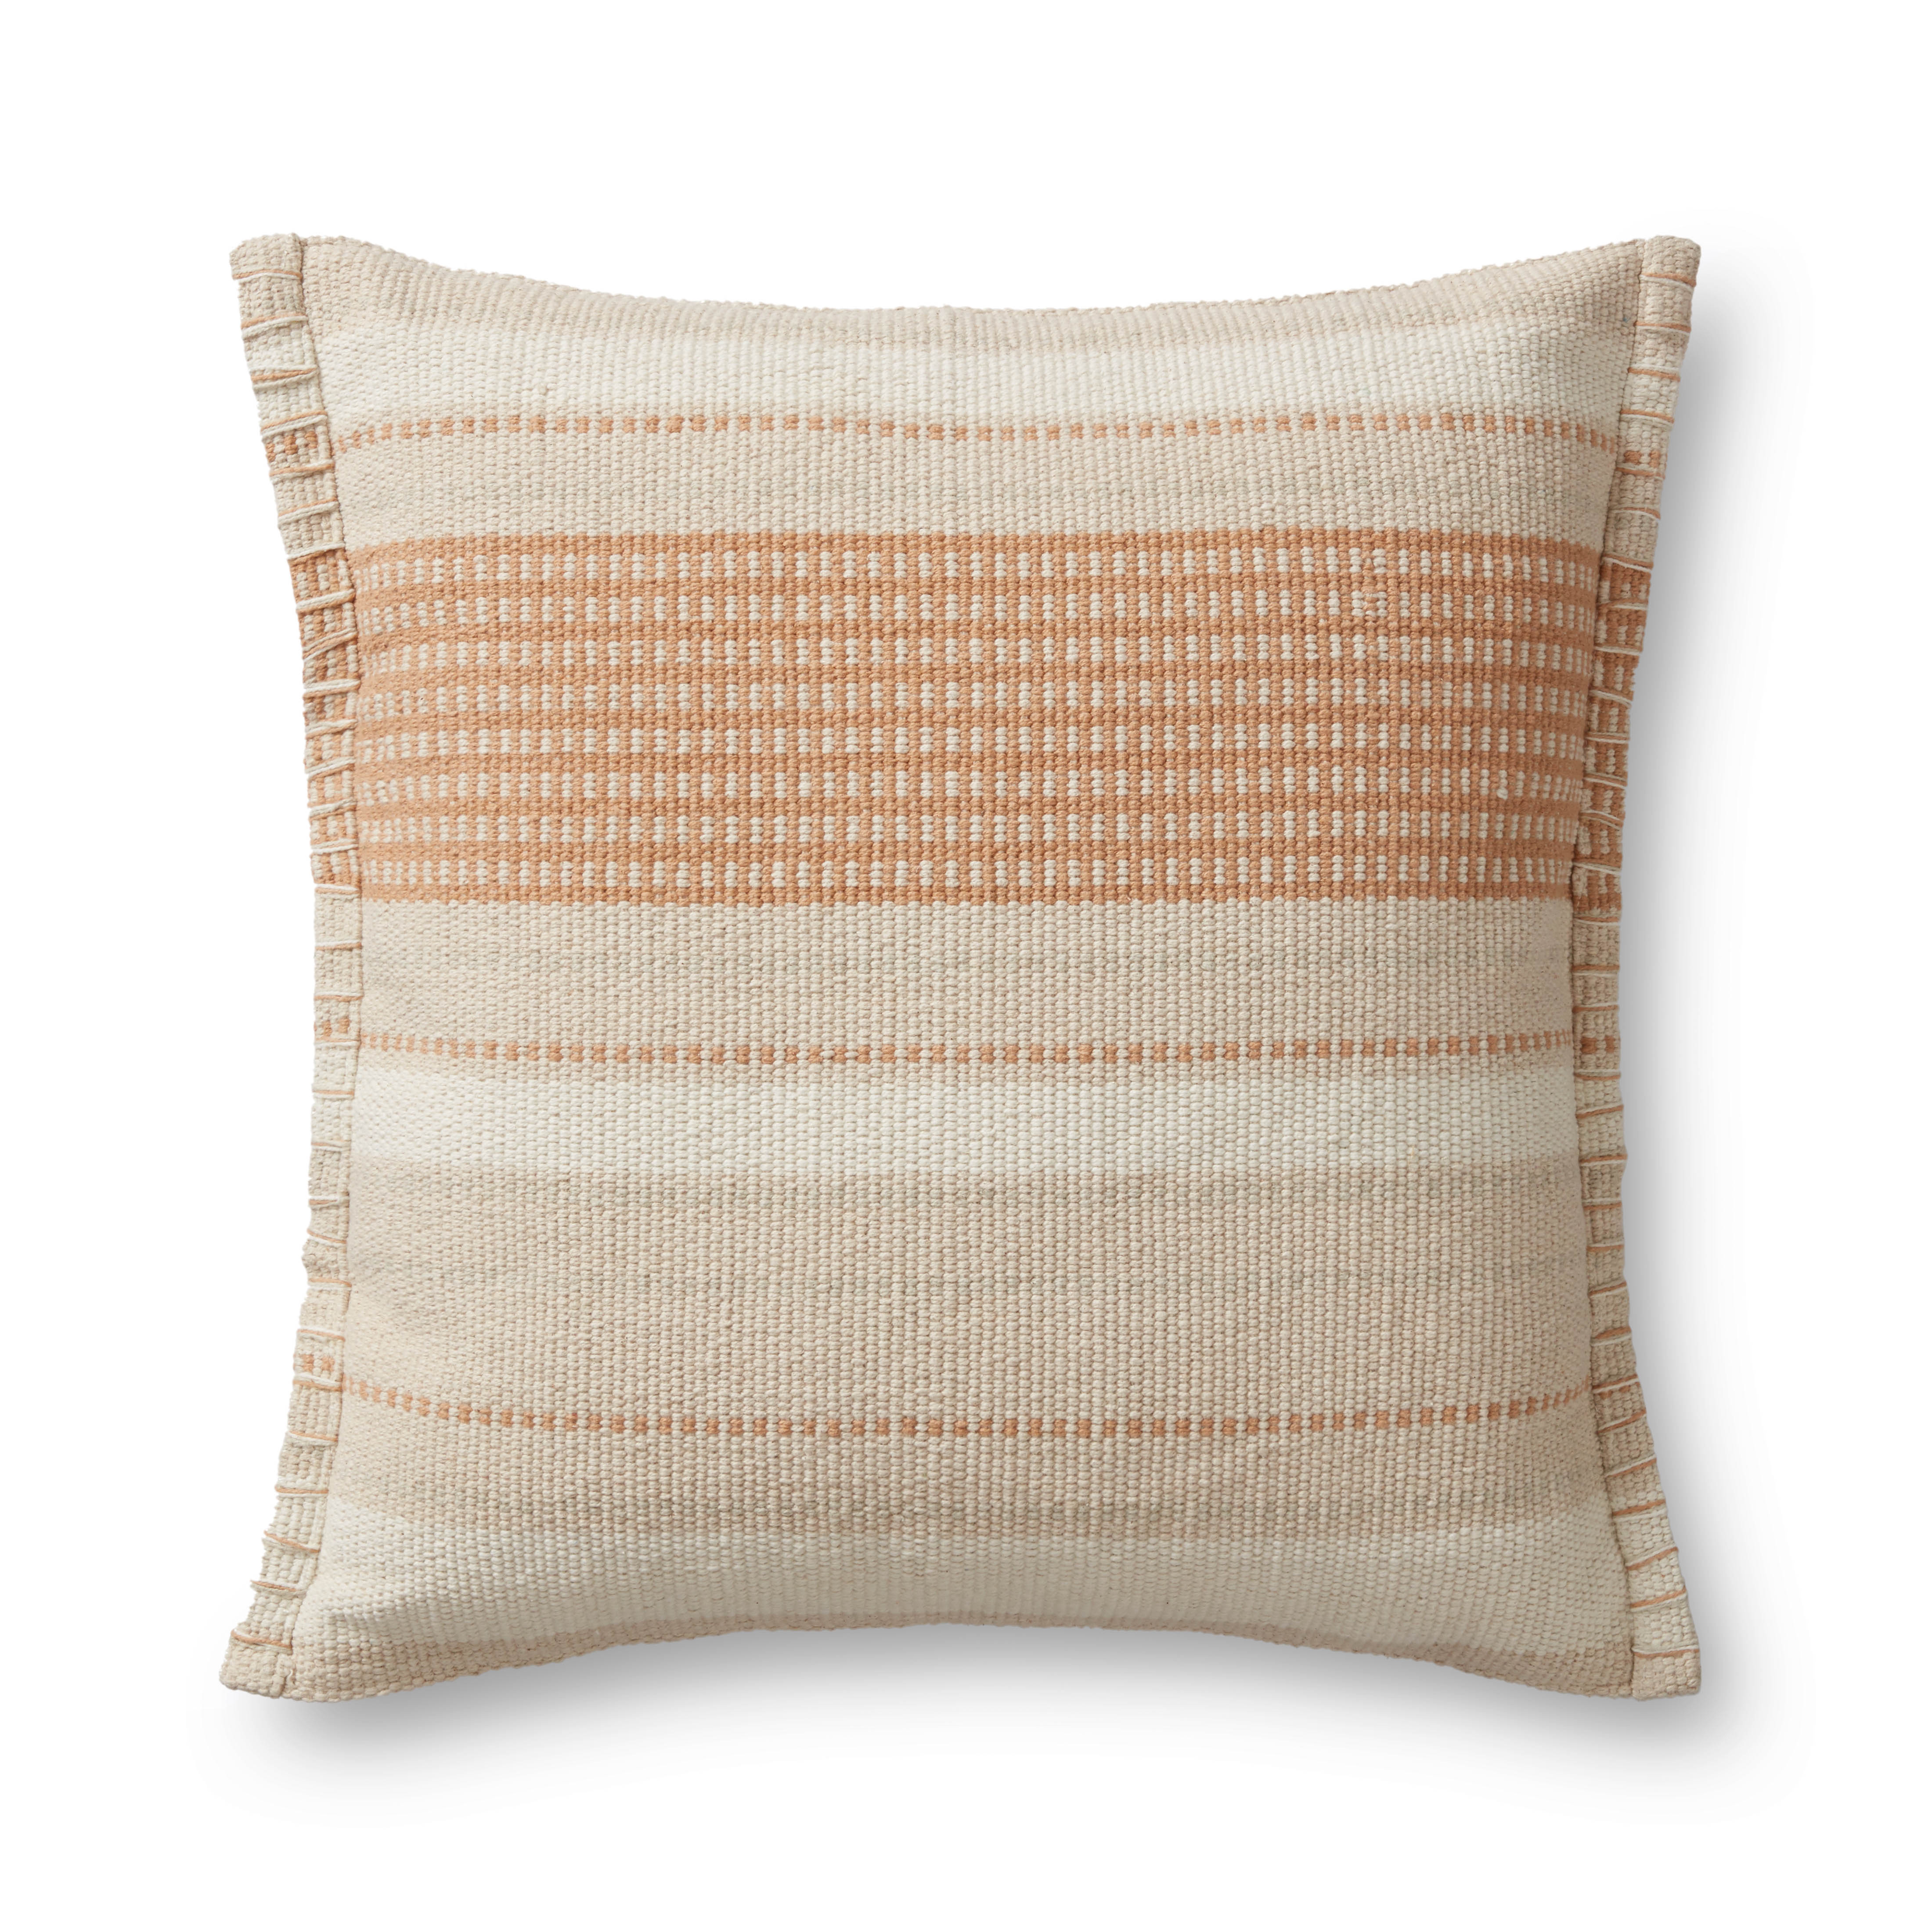 PILLOWS P1176 BEIGE / MULTI 22" x 22" Cover w/Poly - Magnolia Home by Joana Gaines Crafted by Loloi Rugs